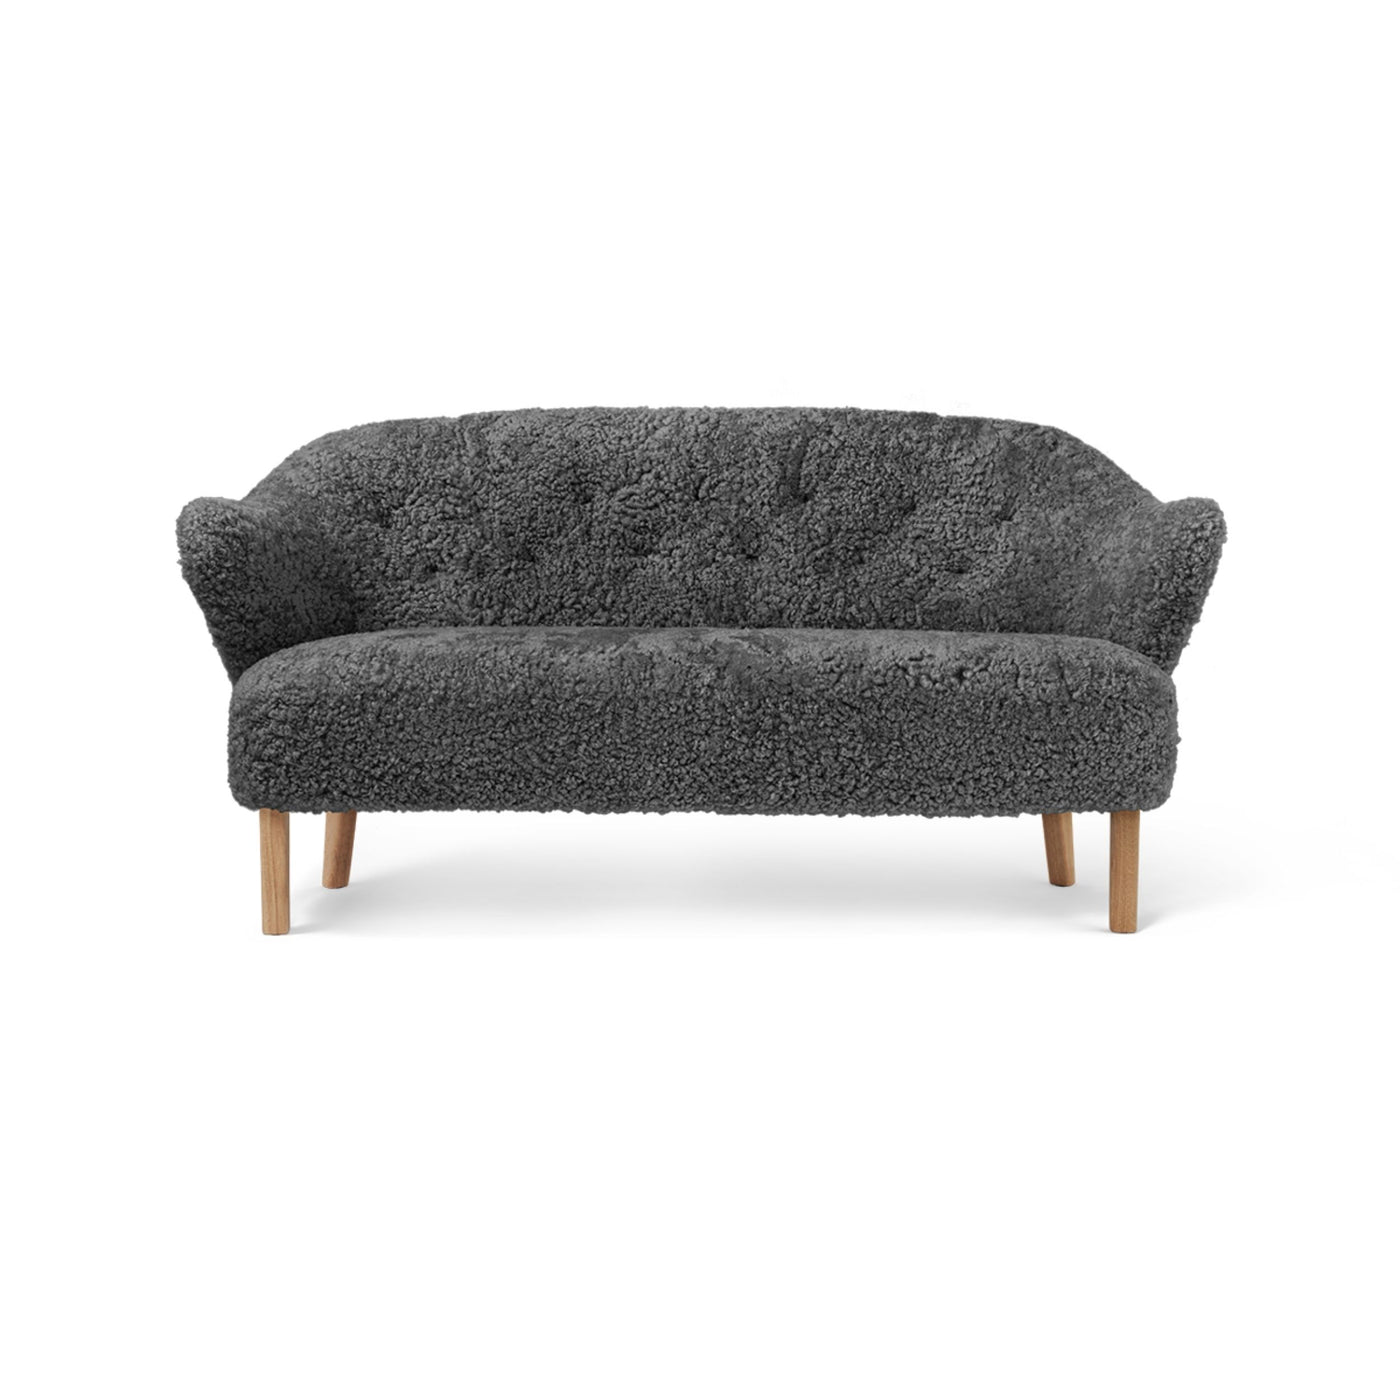 By Lassen Ingeborg sofa with natural oak legs. Made to order from someday designs. #colour_sheepskin-anthracite